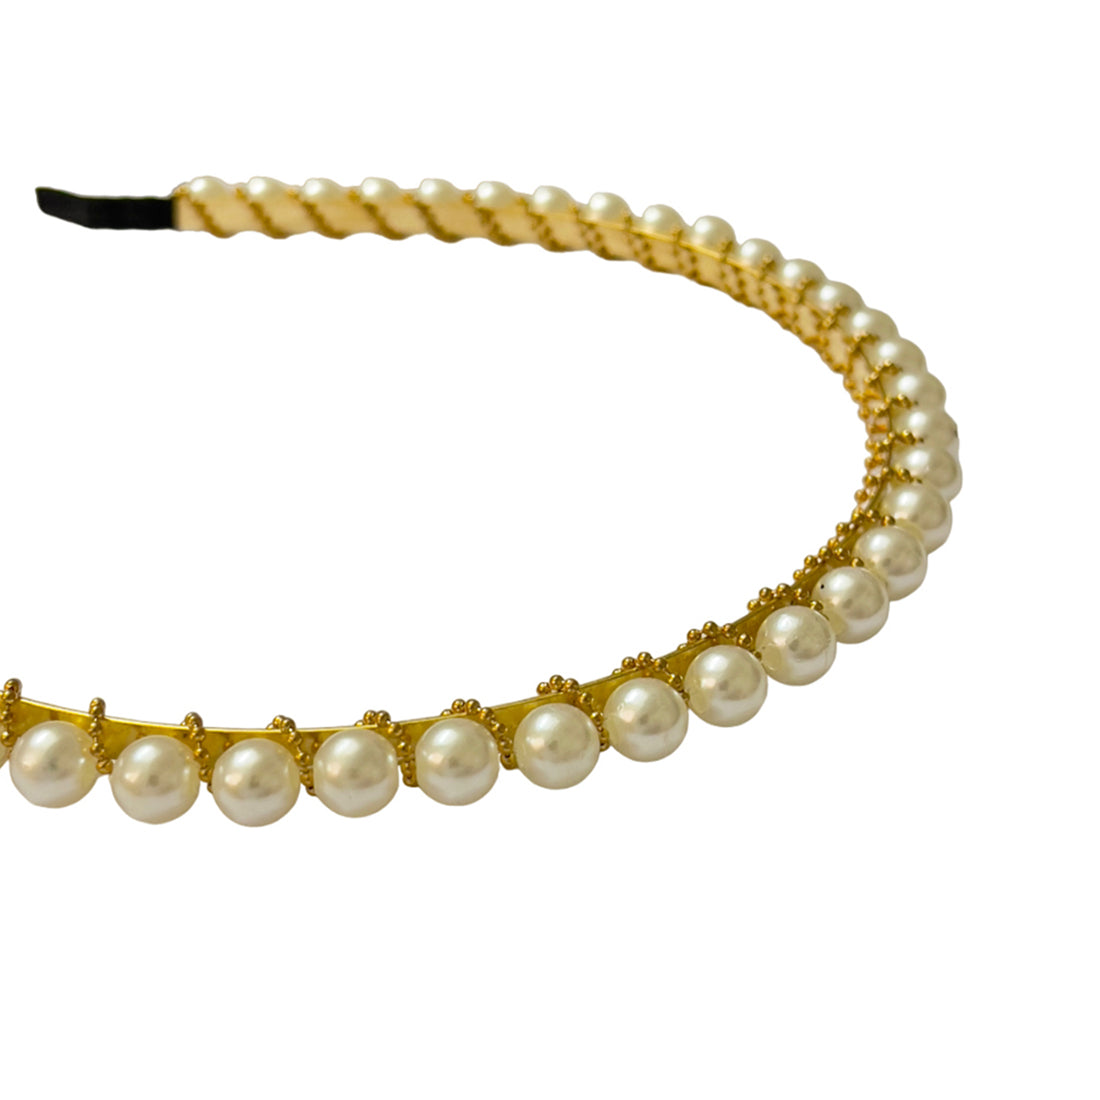 White Pearls Studded with Gold Wire Wrapped Gold-Toned Hairband